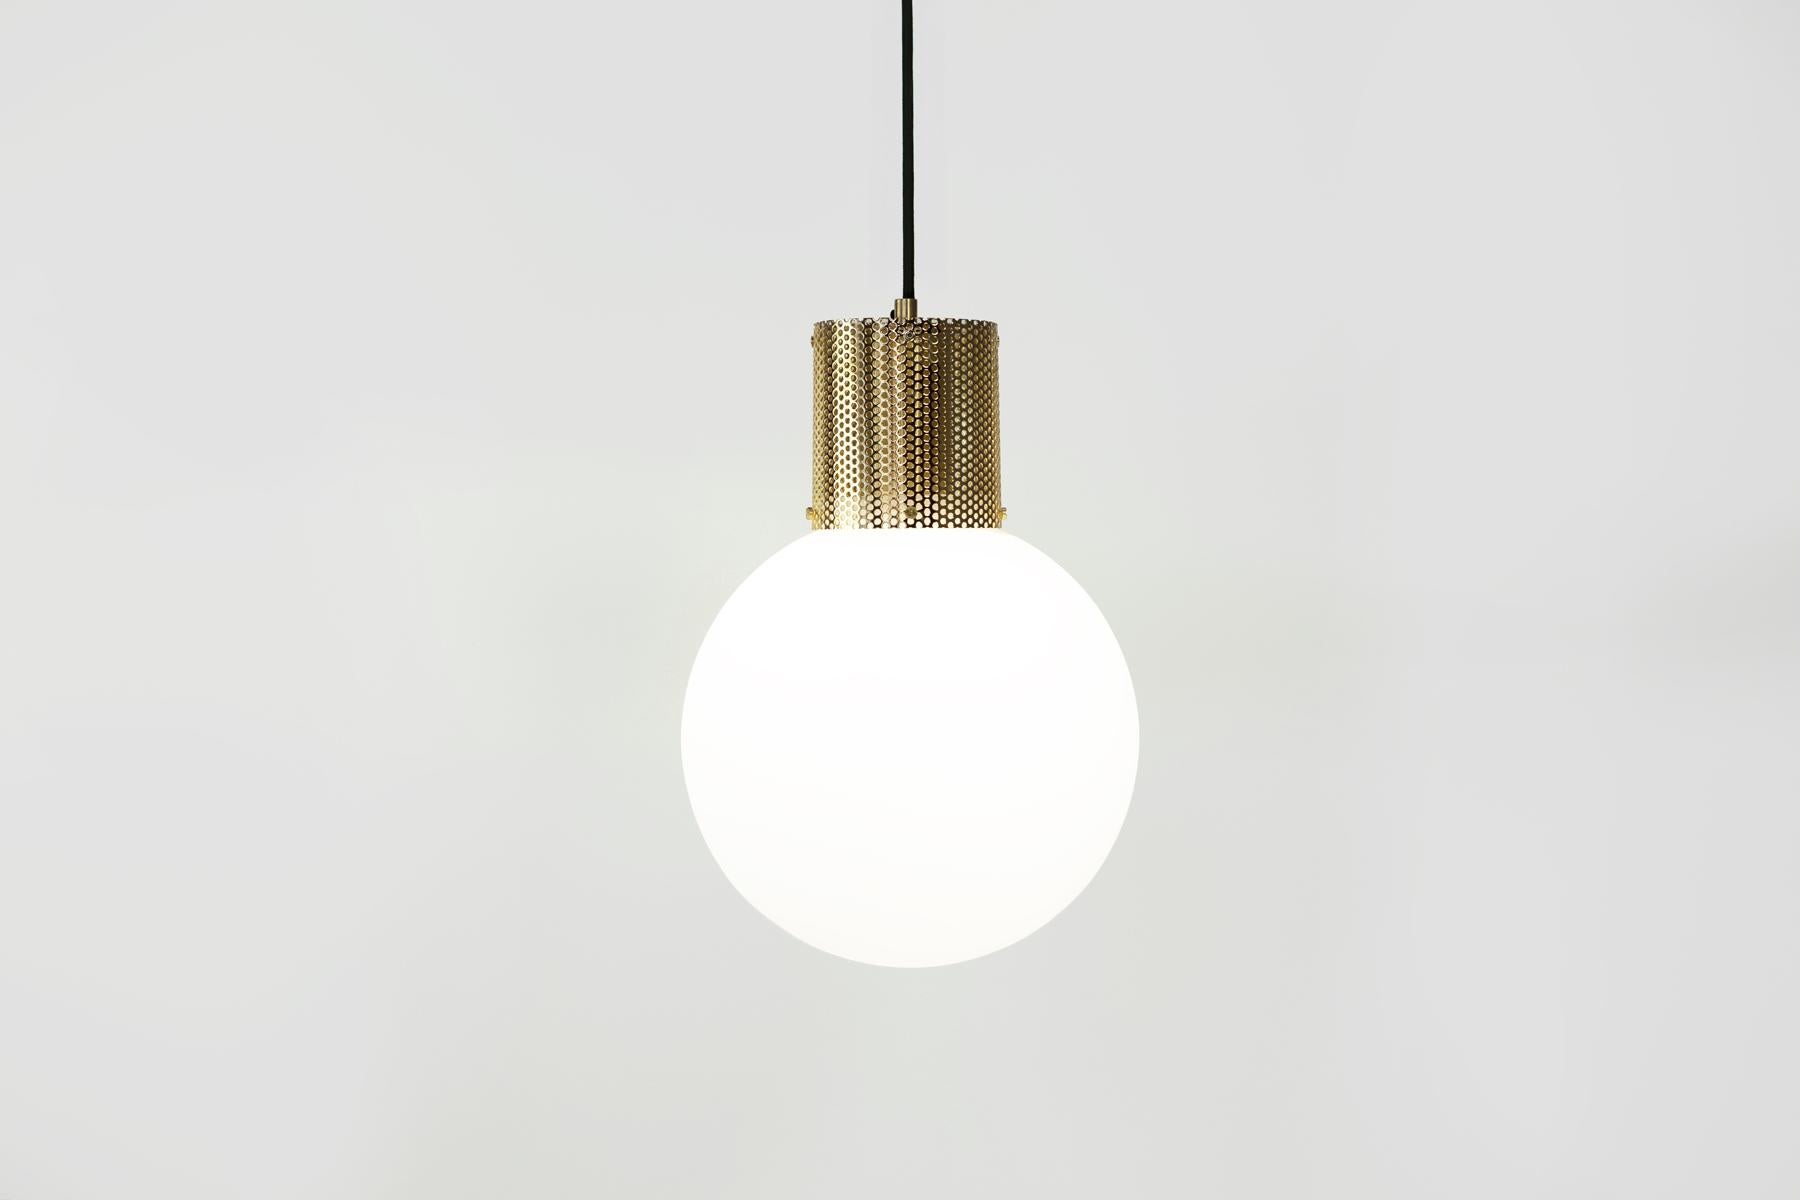 Perf Pendant Light Large Off-White Perforated Tube, Glass Round Orb Shade In New Condition For Sale In Broadmeadows, Victoria